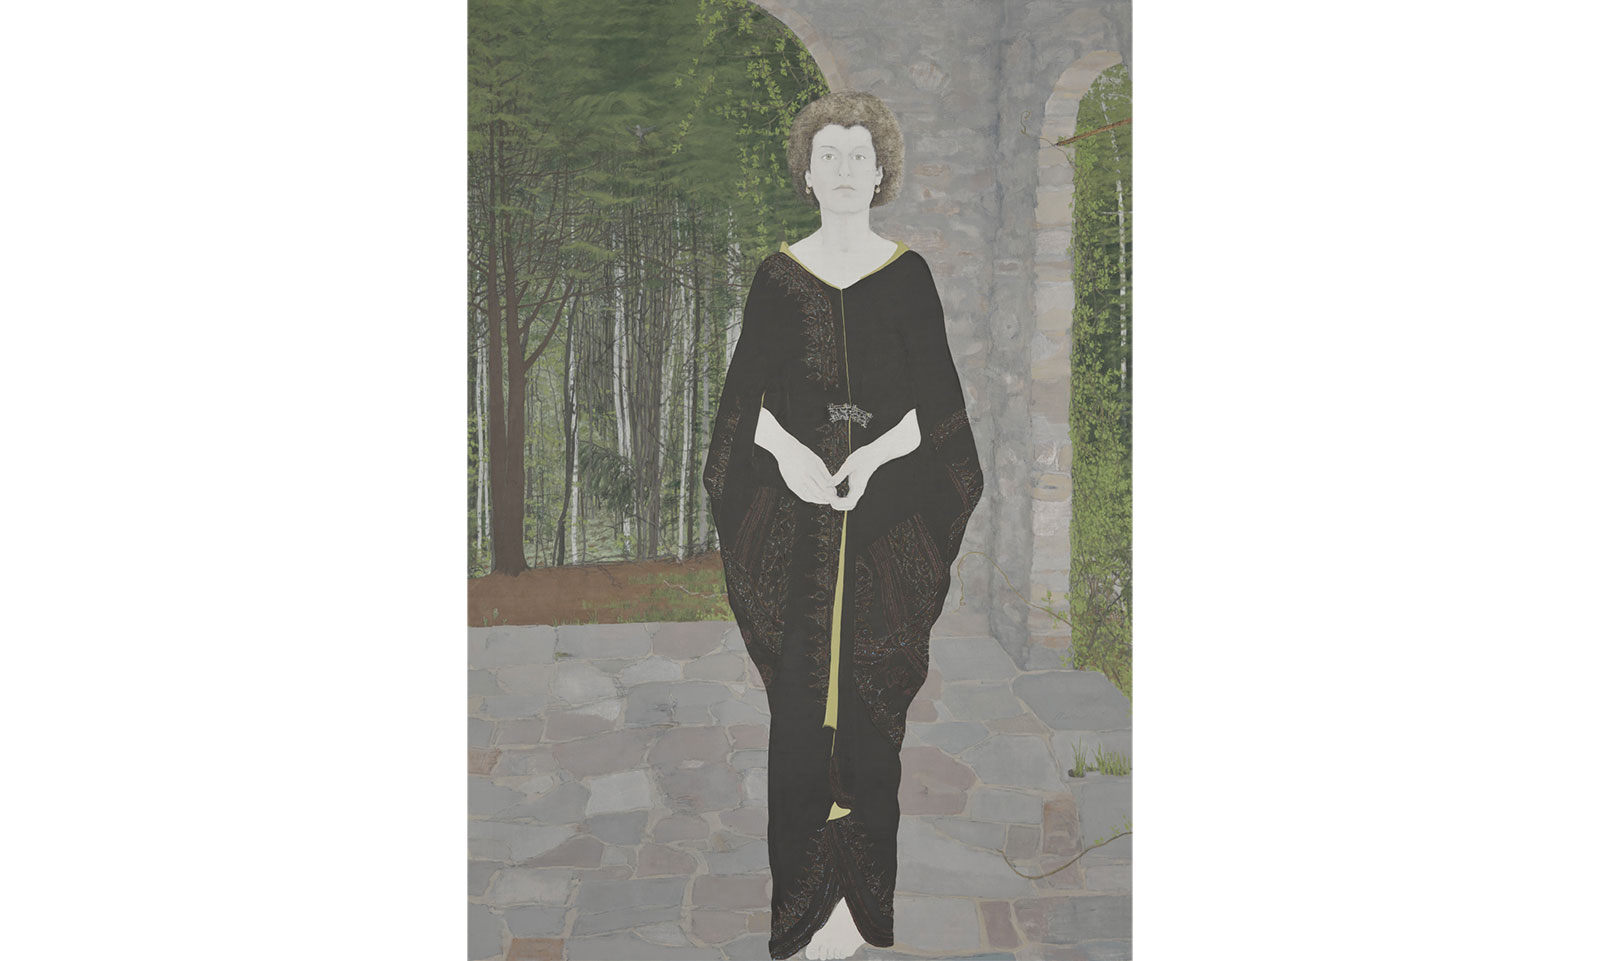 Marcia Marcus, Self Portrait at MacDowell Colony, New Hampshire (Autorretrato en la Colonia MacDowell, Nuevo Hampshire), 1969. Oil on canvas. Gift of American Academy of Arts and Letters Childe Hassam Fund. © 2022 Artists Rights Society (ARS), New York.